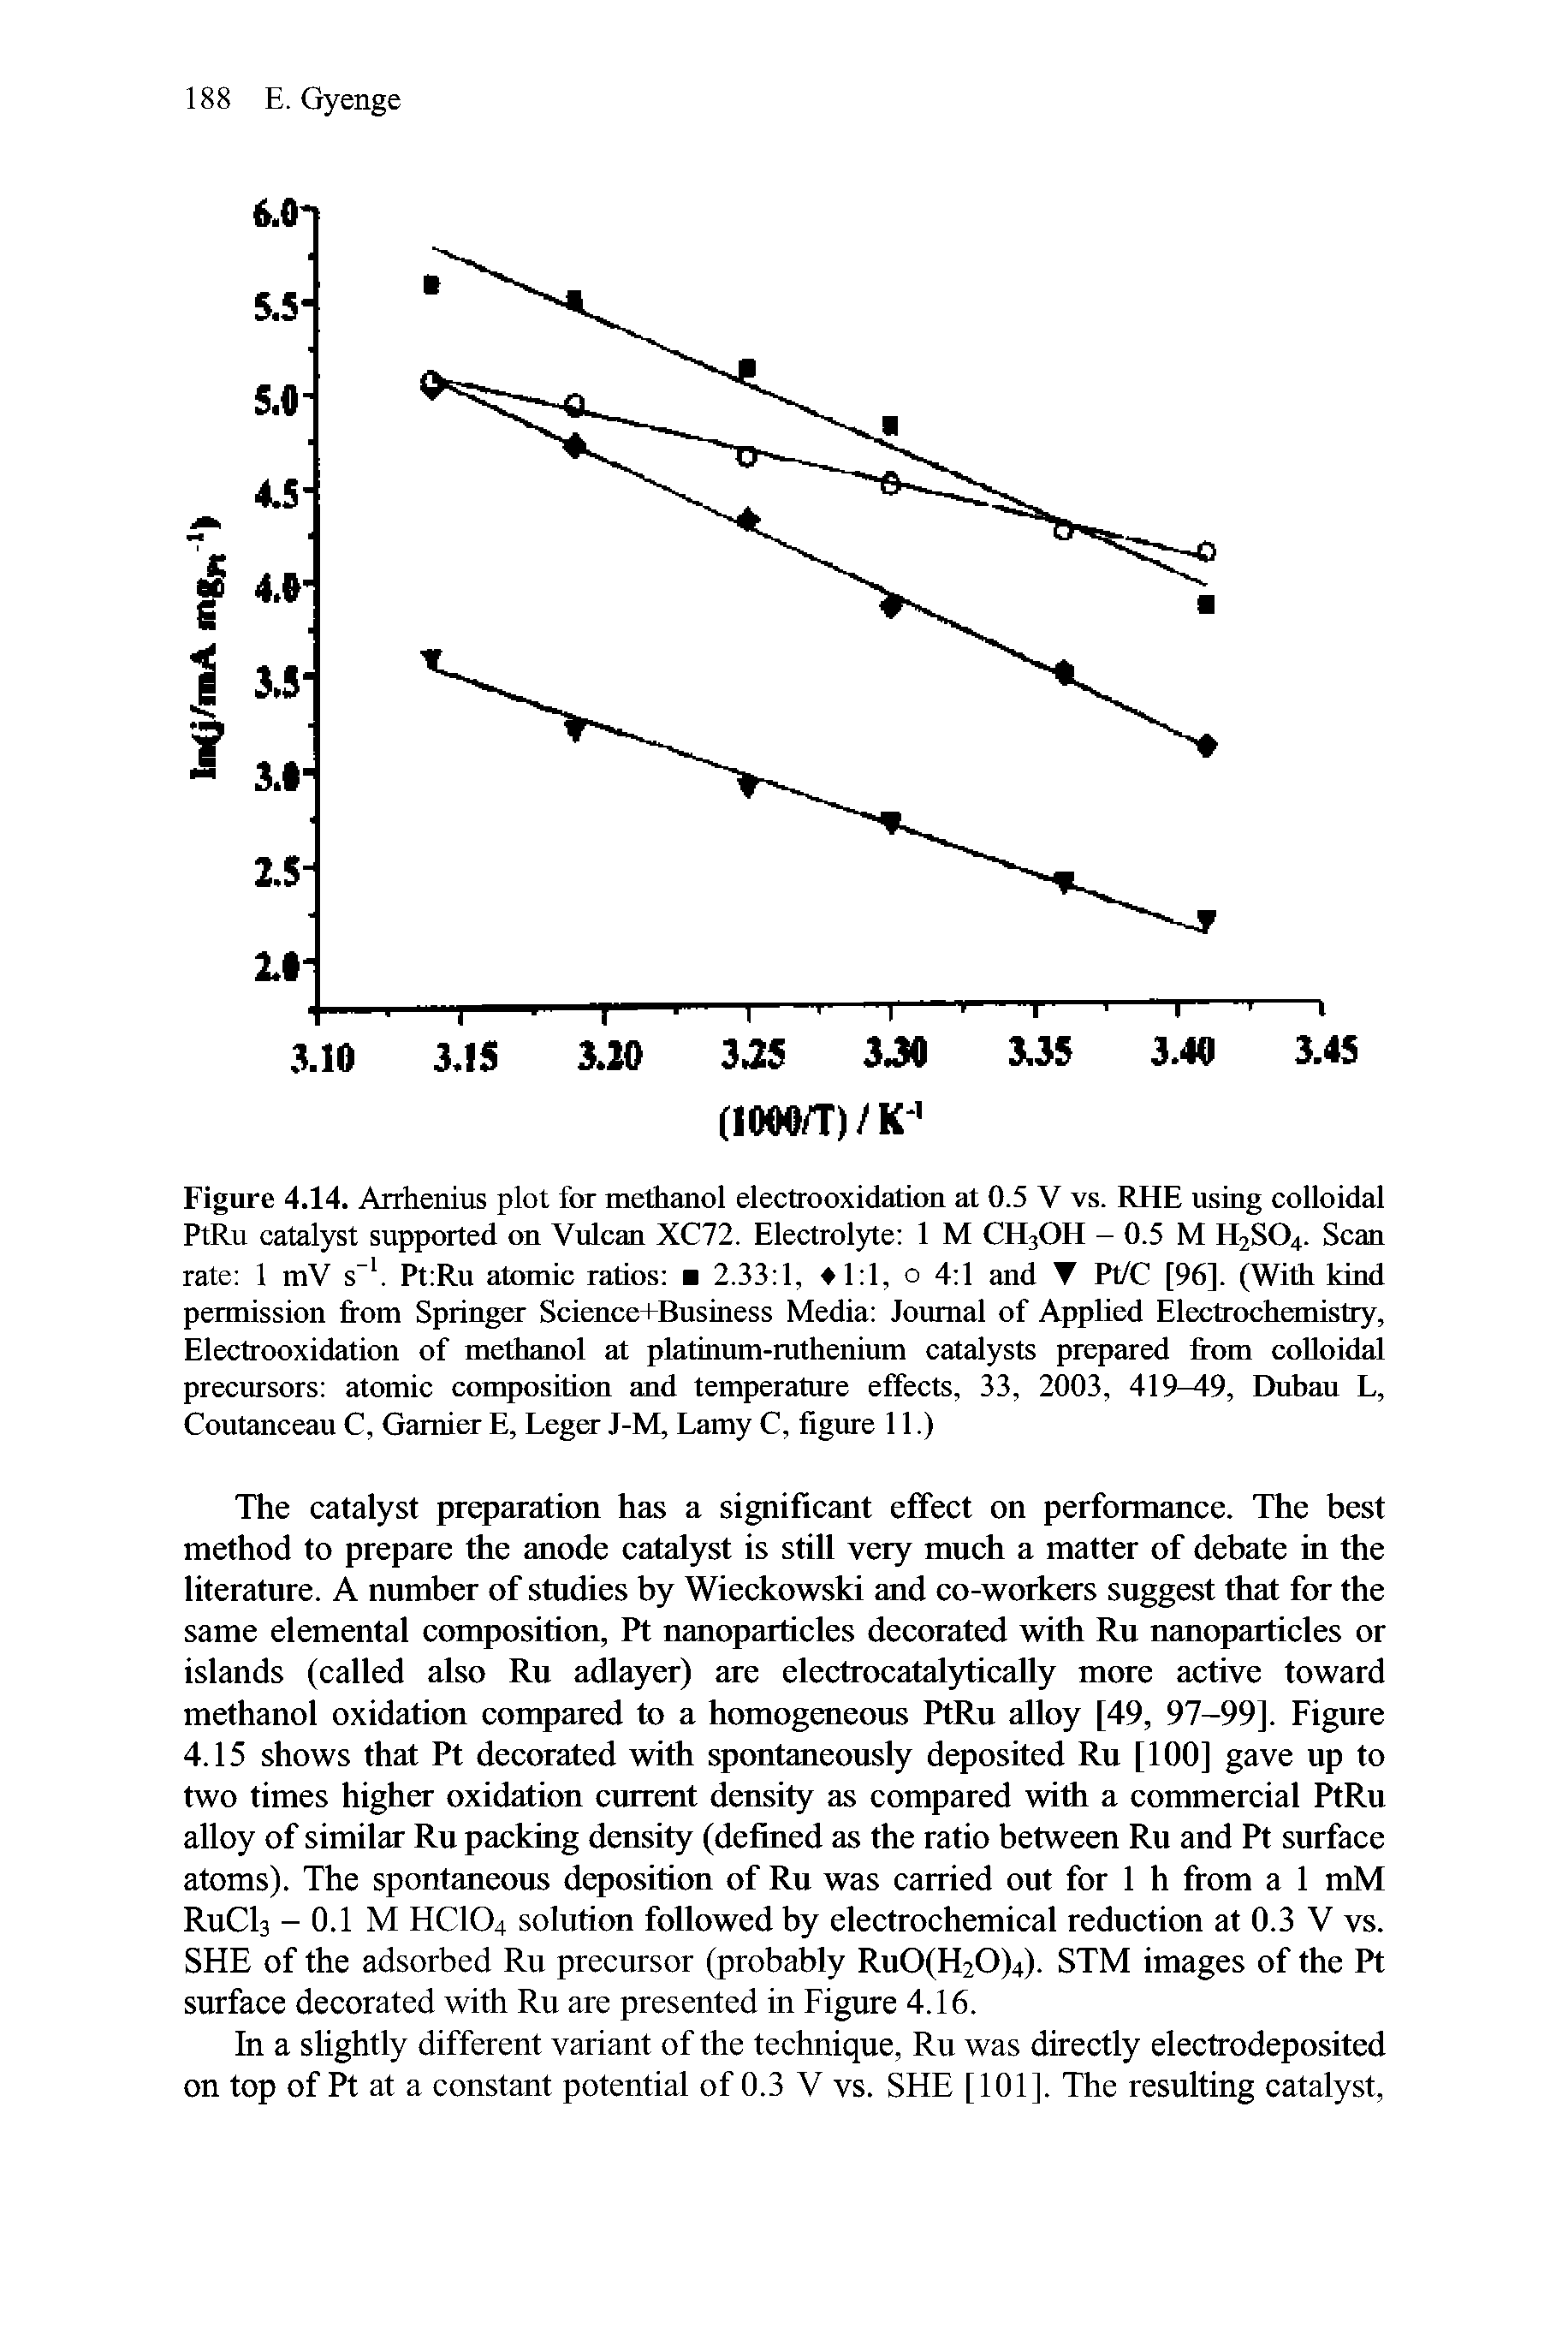 Figure 4.14. Arrhenius plot for methanol electrooxidation at 0.5 V vs. RHE using colloidal PtRu catalyst supported on Vulcan XC72. Electrolyte 1 M CH3OH - 0.5 M H2SO4. Scan rate 1 mV s . Pt Ru atomic ratios 2.33 1, , o 4 1 and Pt/C [96]. (With kind permission from Springer Science+Business Media Journal of Applied Electrochemistry, Elecfrooxidation of methanol at platinum-ruthenium catalysts prepared from colloidal precursors atomic composition and temperature effects, 33, 2003, 419-49, Dubau L, Coutanceau C, Gamier E, Leger J-M, Lamy C, figure 11.)...